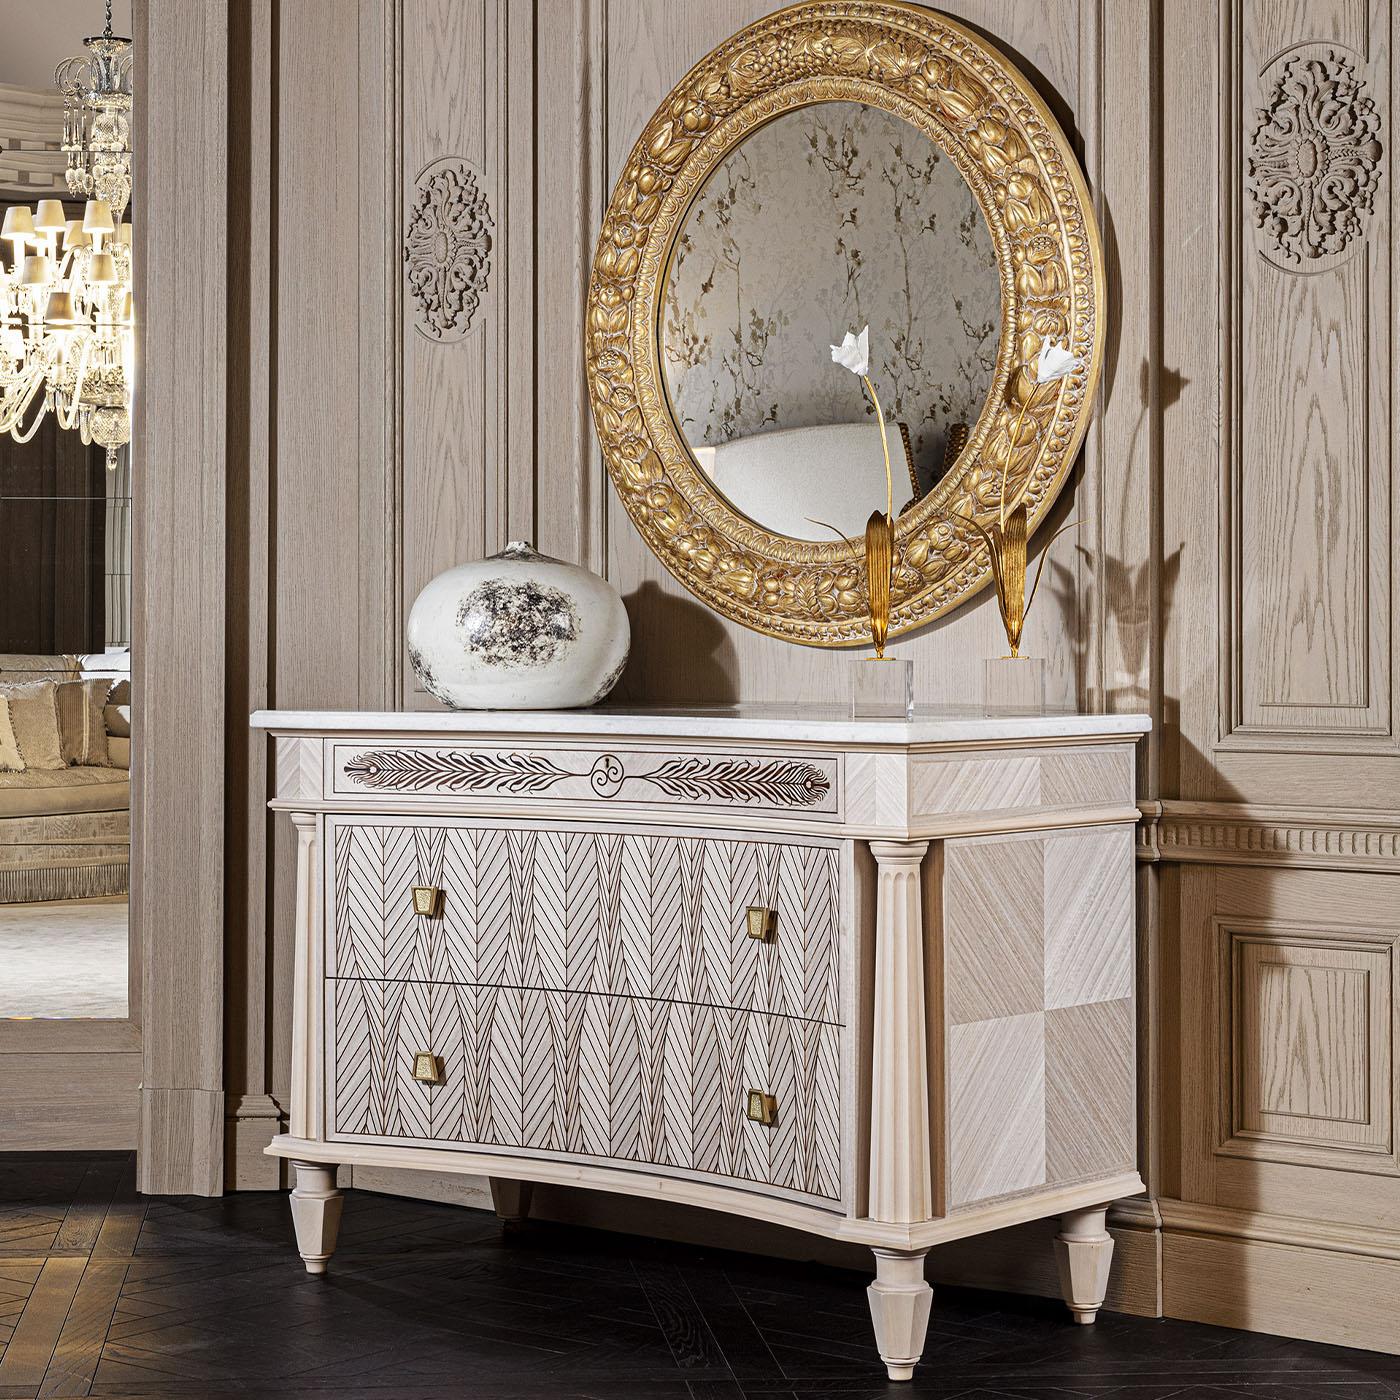 This chest of drawers is handcrafted and features a fine inlaid eucalyptus frame adorned with a precious marble top.